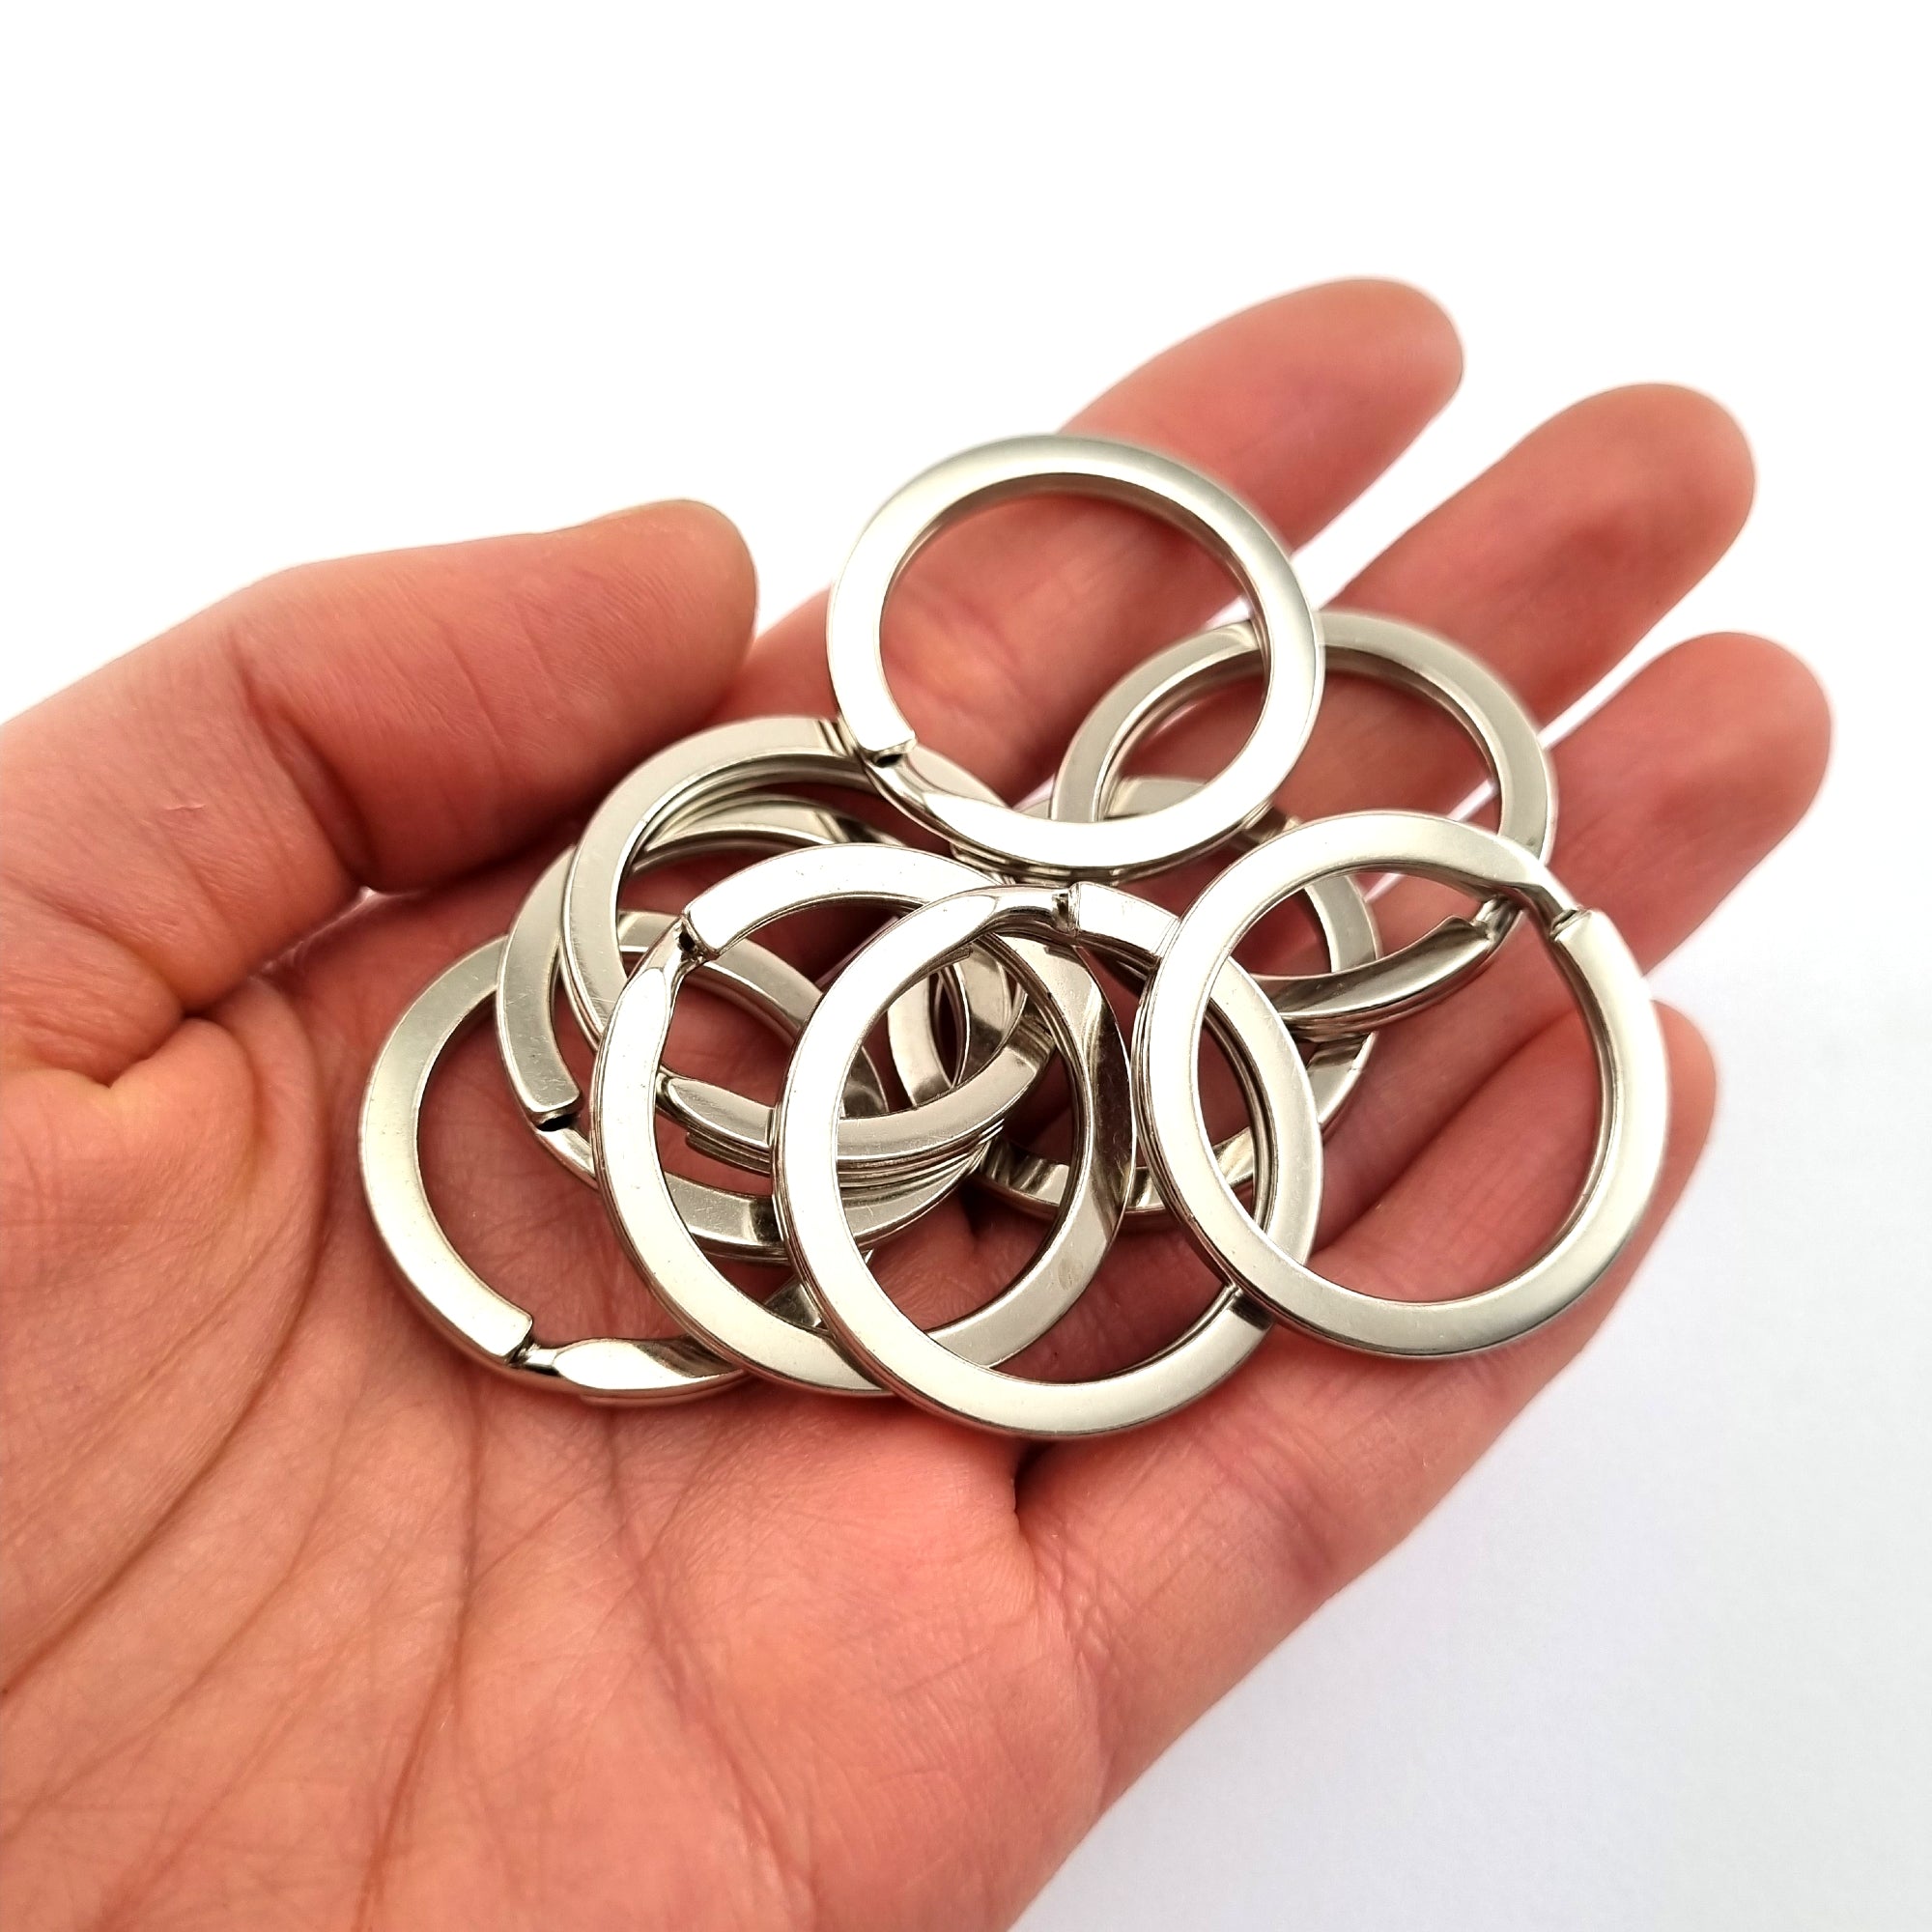 Flat Key Ring - Nickel Spring Wire. Bags of 100. Australia wide shipping. Shop chain.com.au